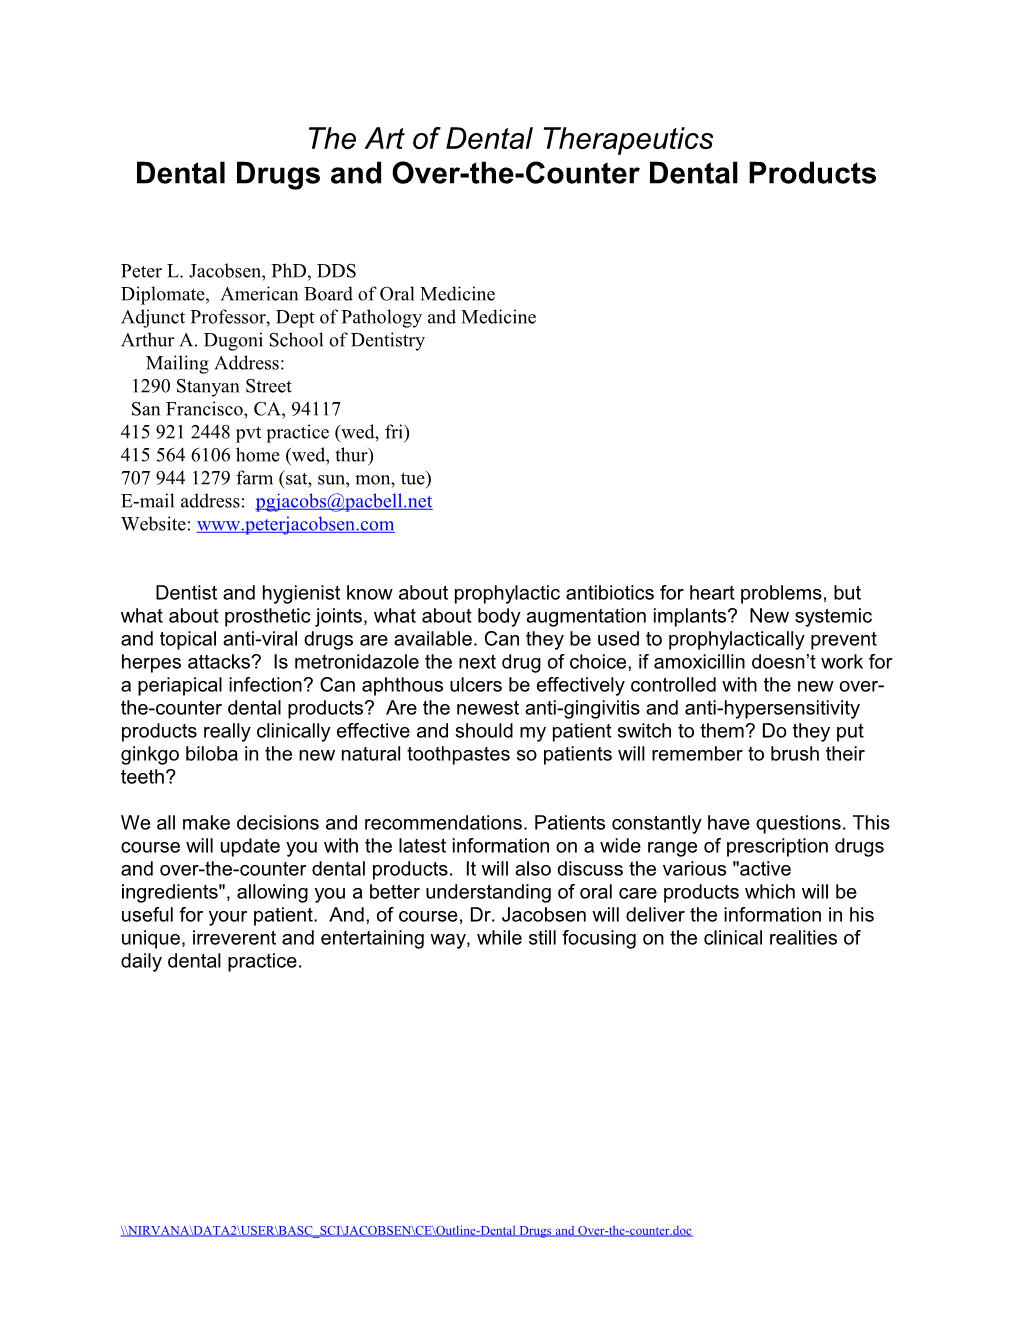 Dental Drugs and Over-The-Counter Dental Products for ______ an Update